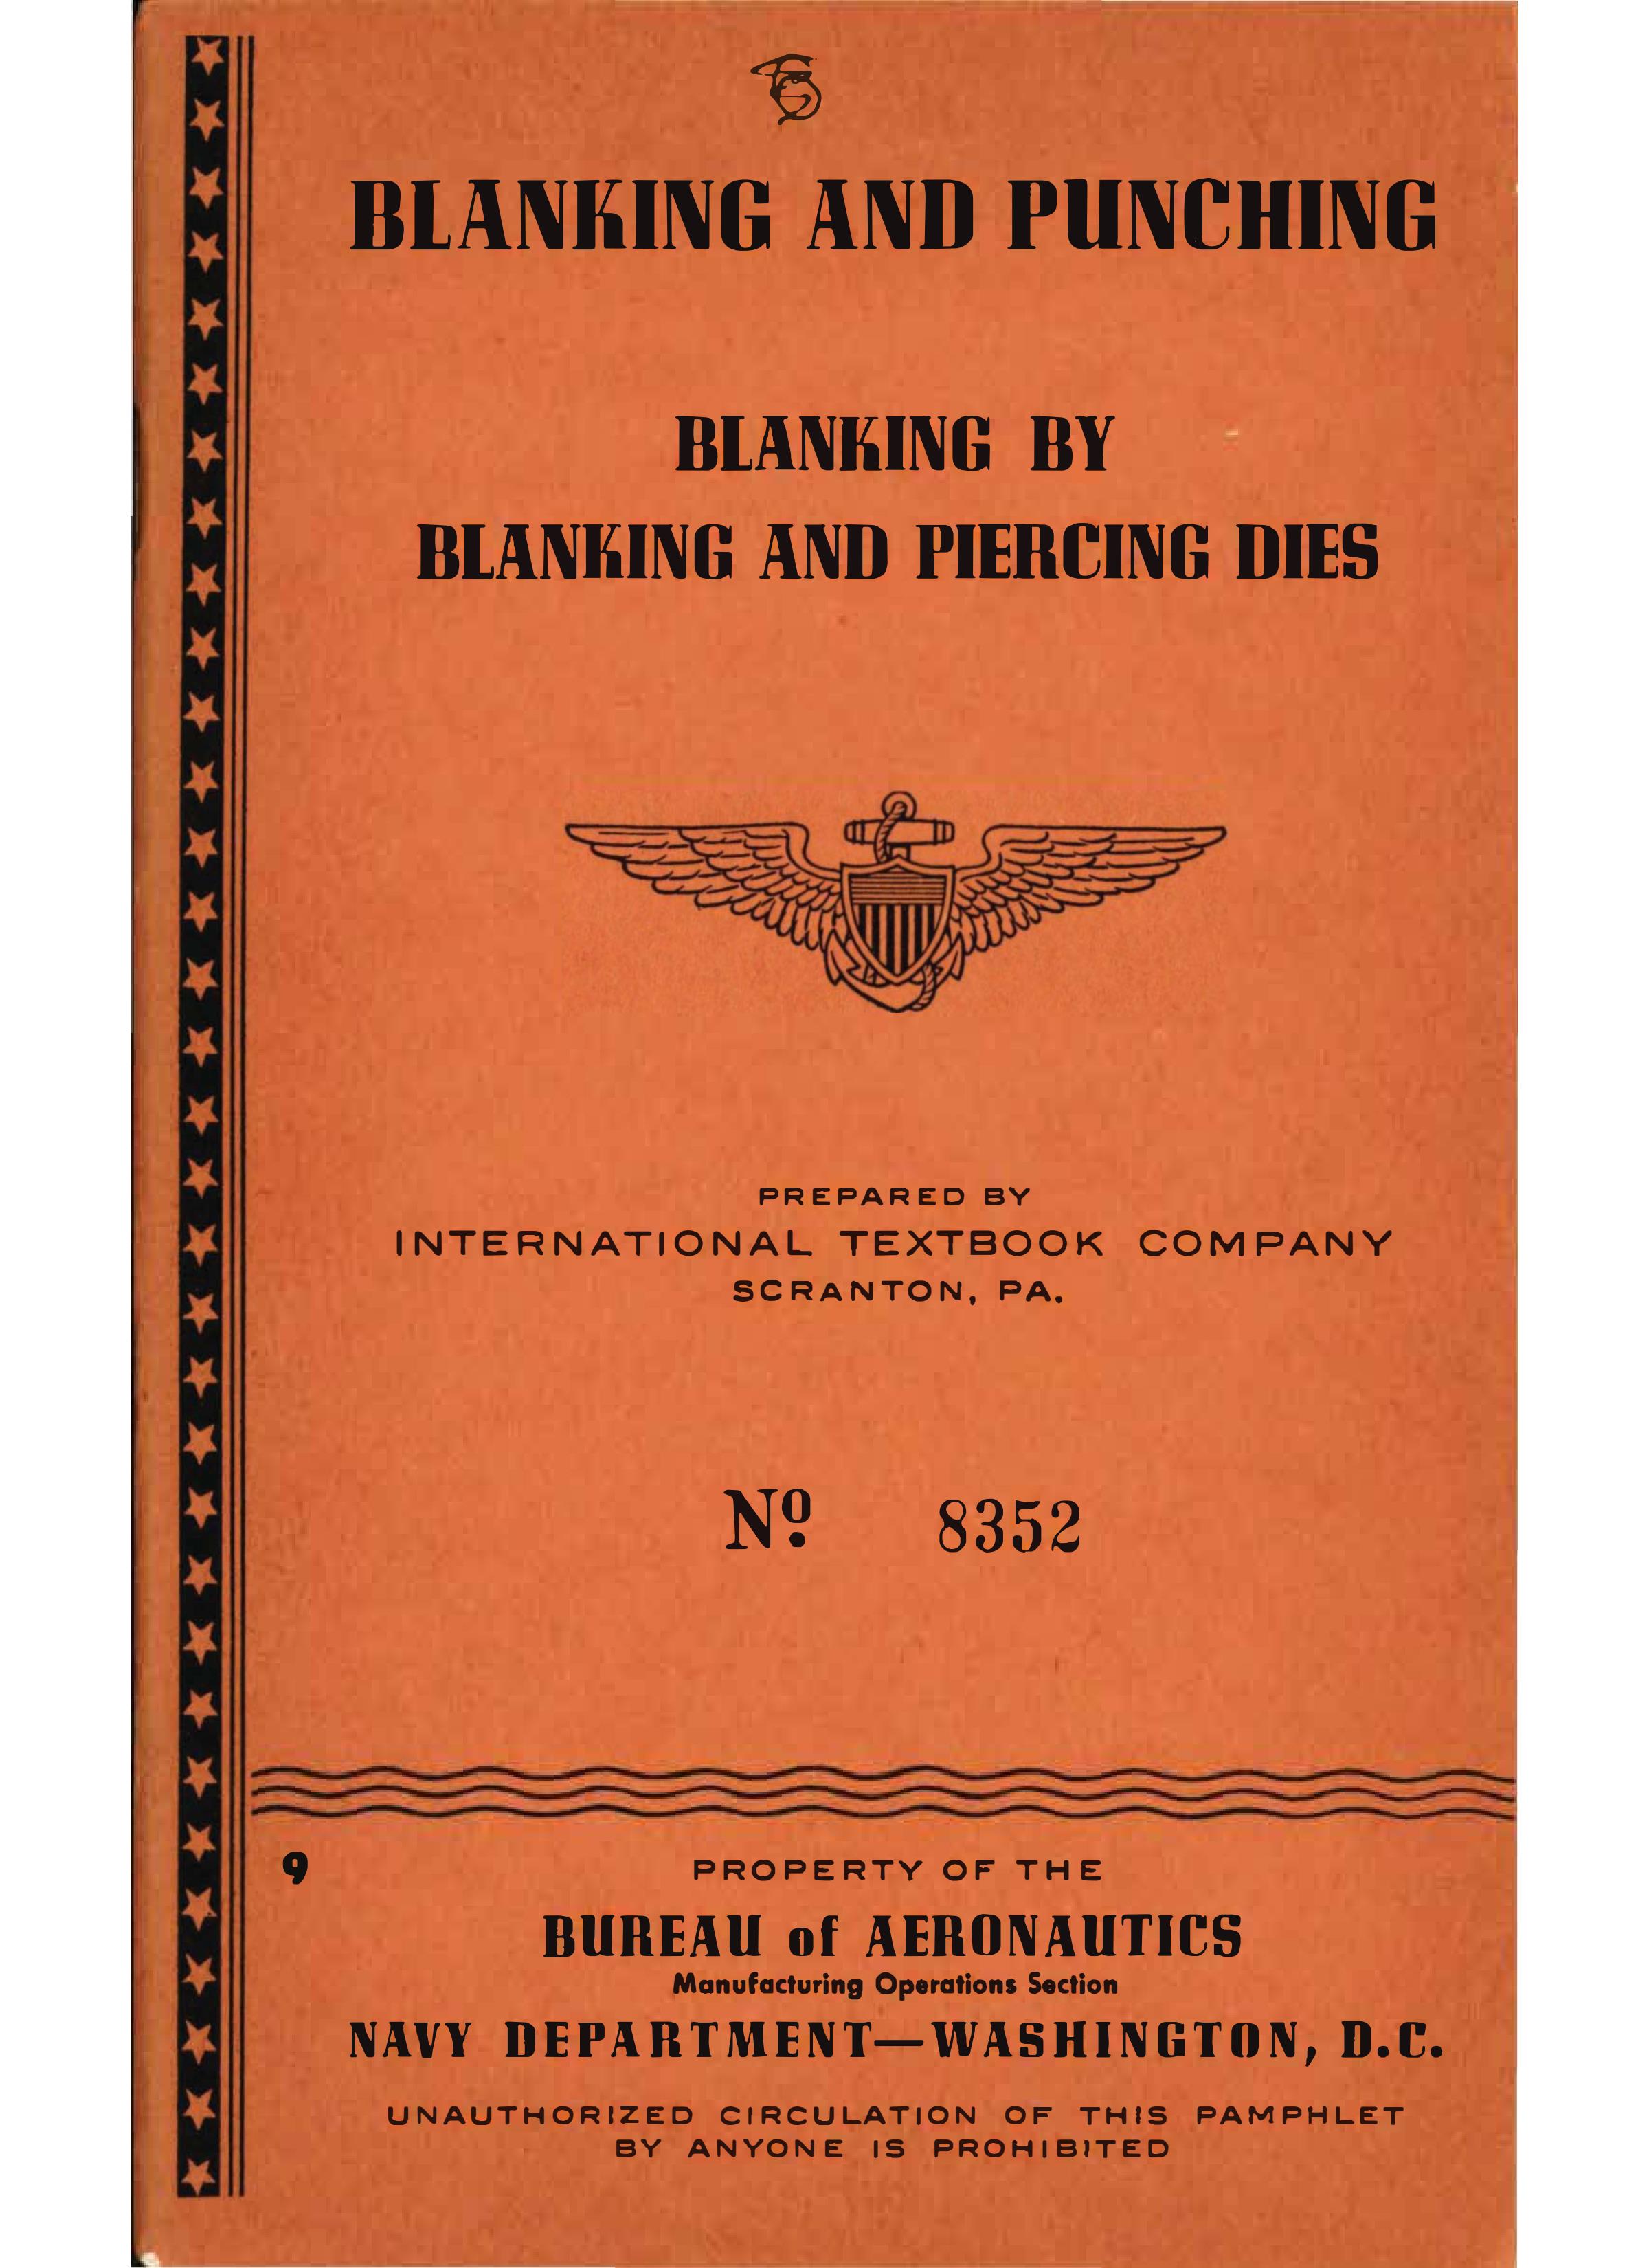 Sample page 1 from AirCorps Library document: Blanking & Punching - Blanking & Piercing Dies - Bureau of Aeronautics